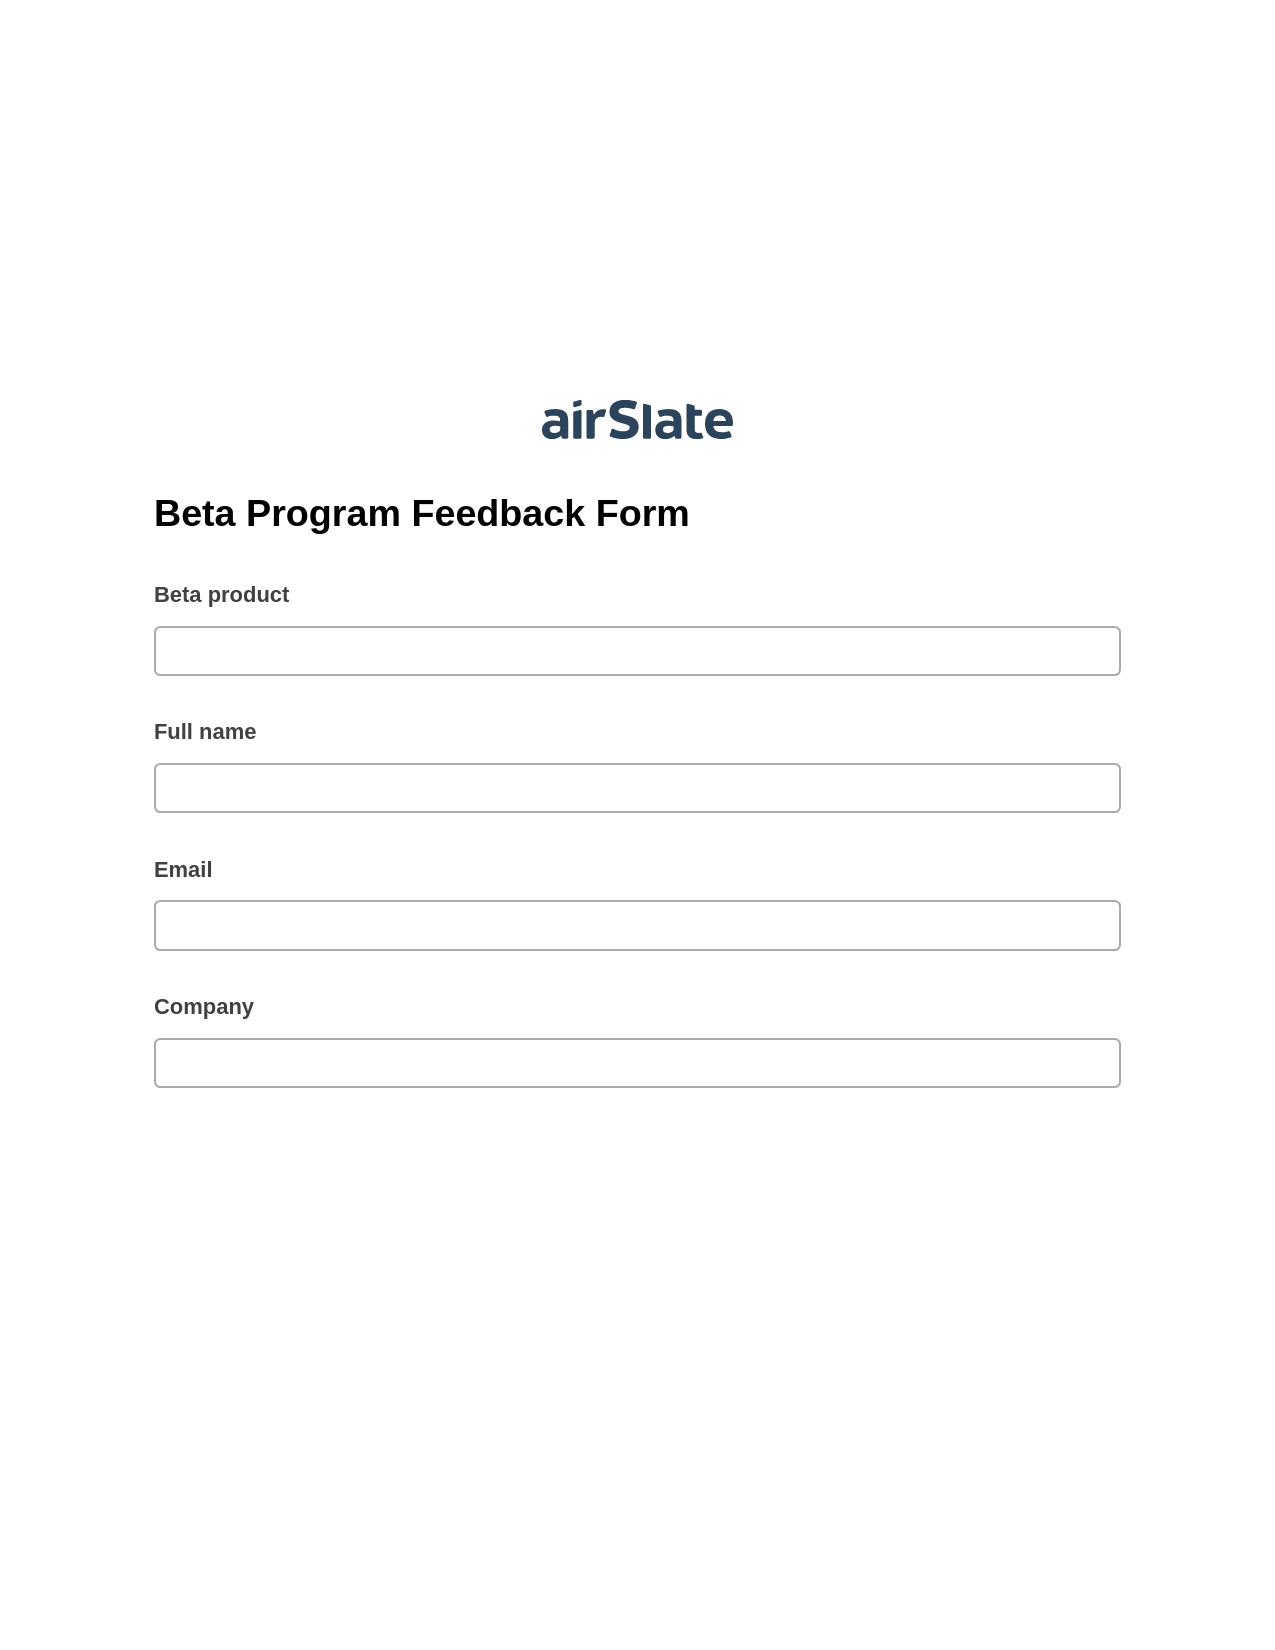 Beta Program Feedback Form Pre-fill from Salesforce Records with SOQL Bot, Roles Reminder Bot, Export to Excel 365 Bot